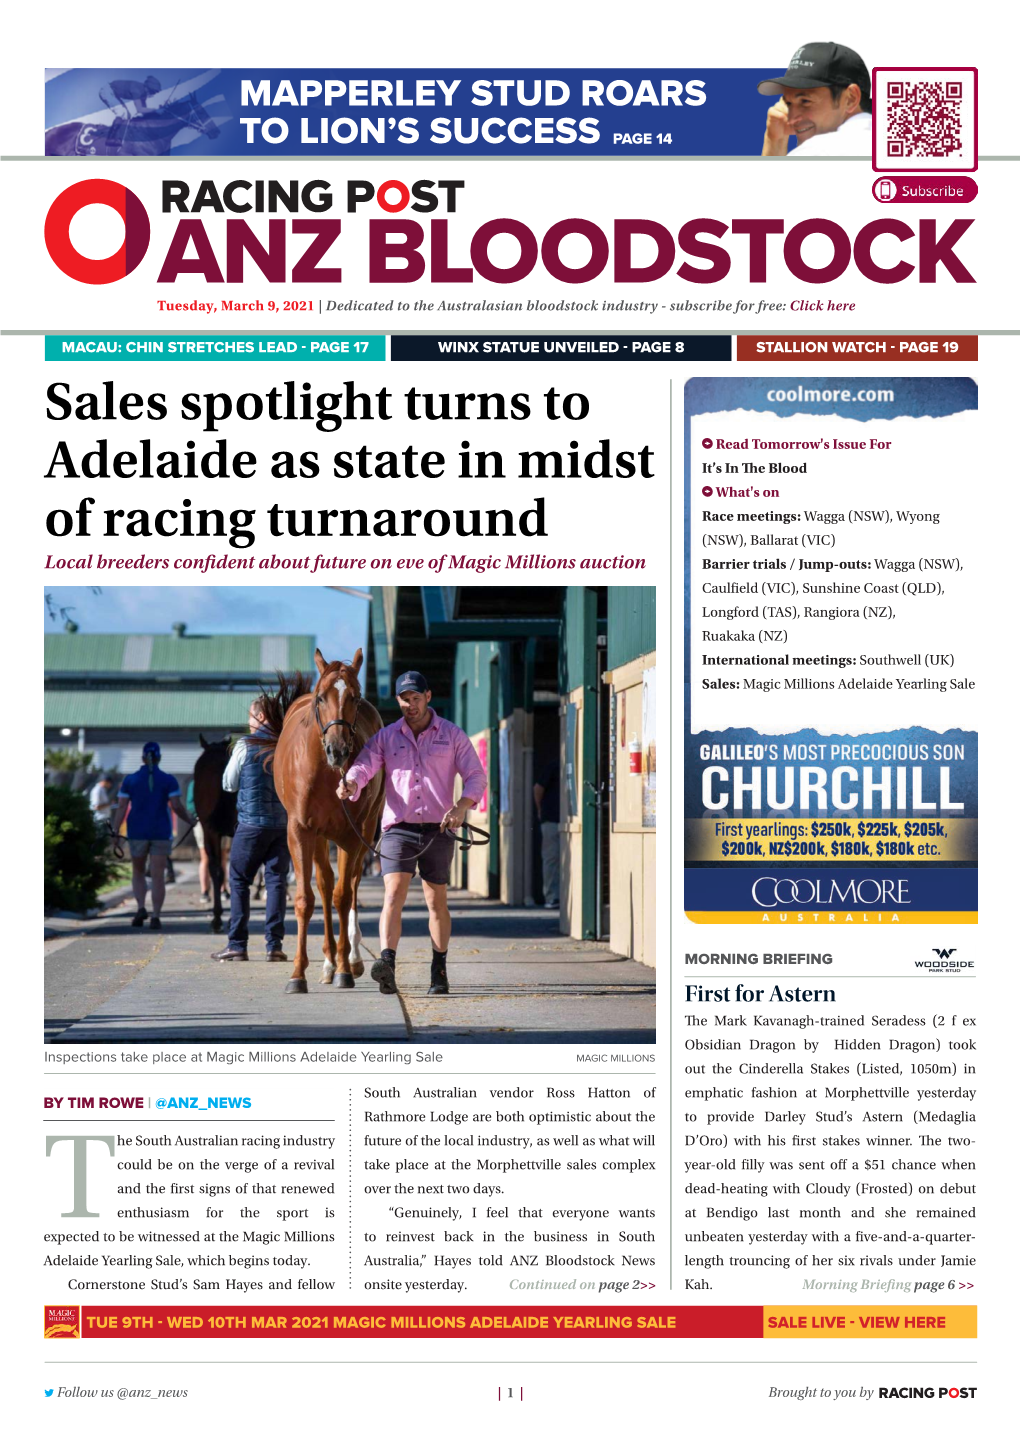 Sales Spotlight Turns to Adelaide As State in Midst of Racing Turnaround | 2 | Tuesday, March 9, 2021